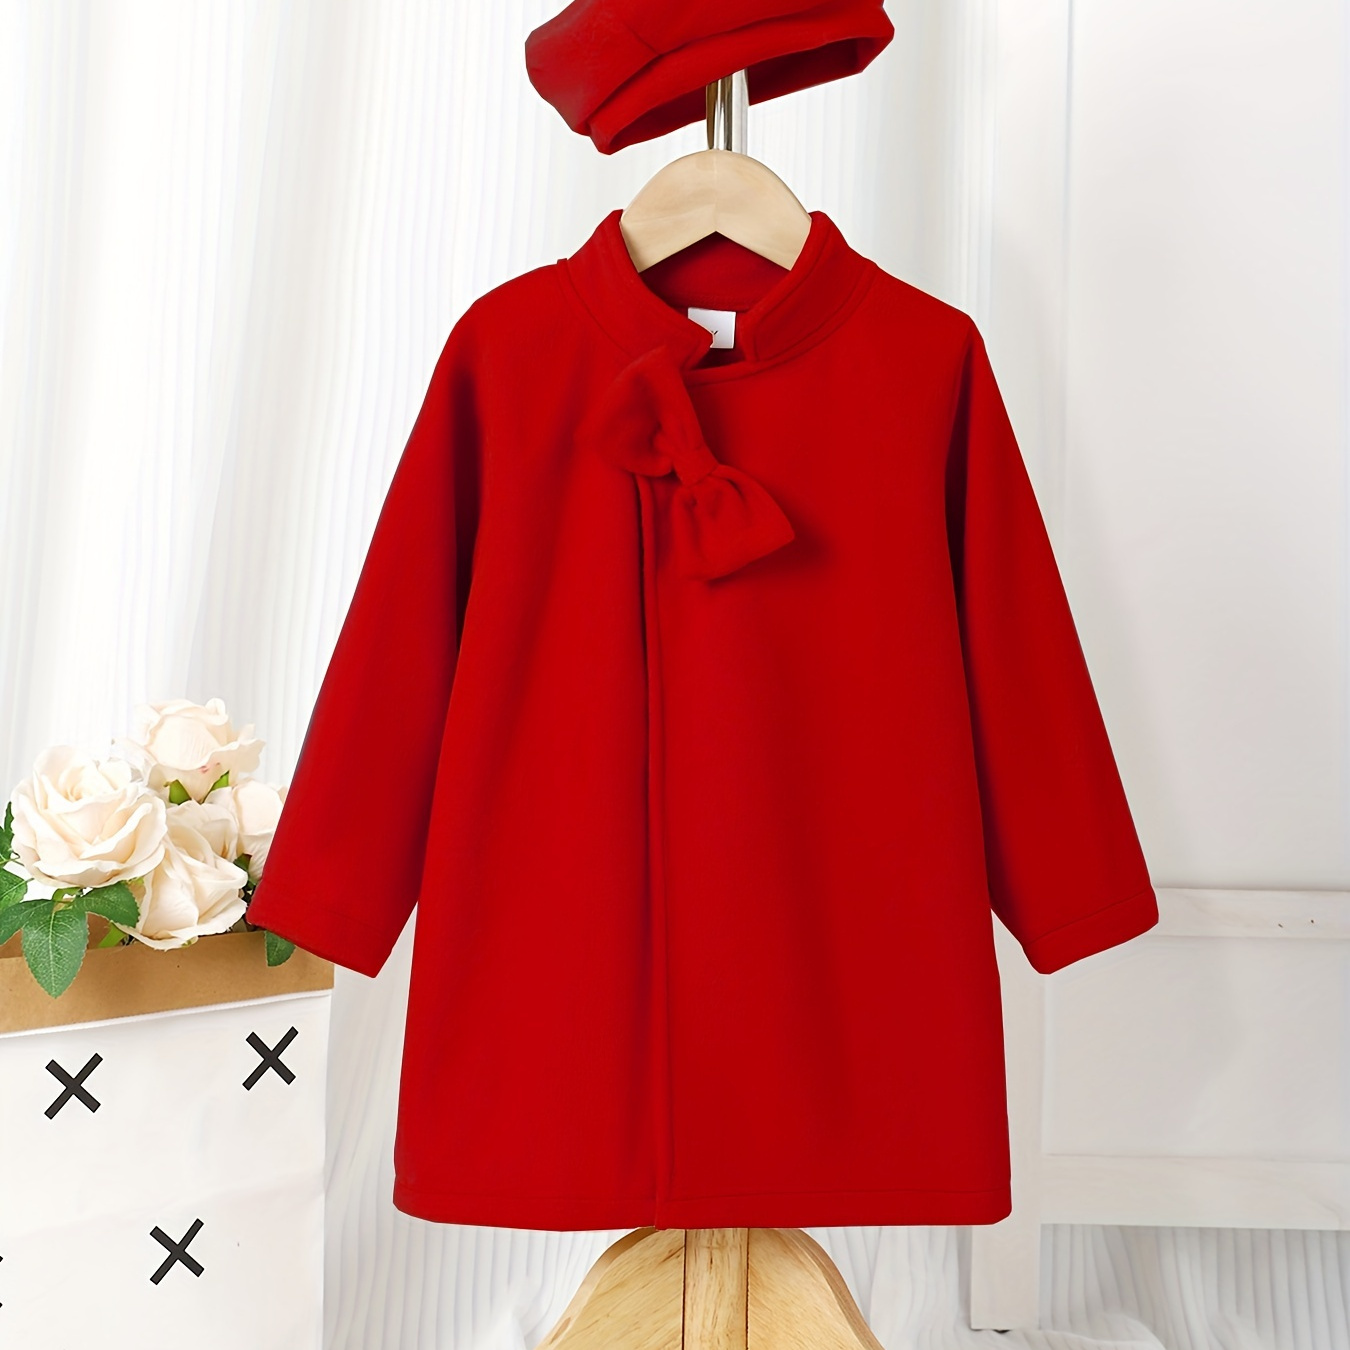 

4-7y Girls' Stand-up Collar Bownot Suit Jacket, Elegant Style Kids Windproof Dress Coats With Hat